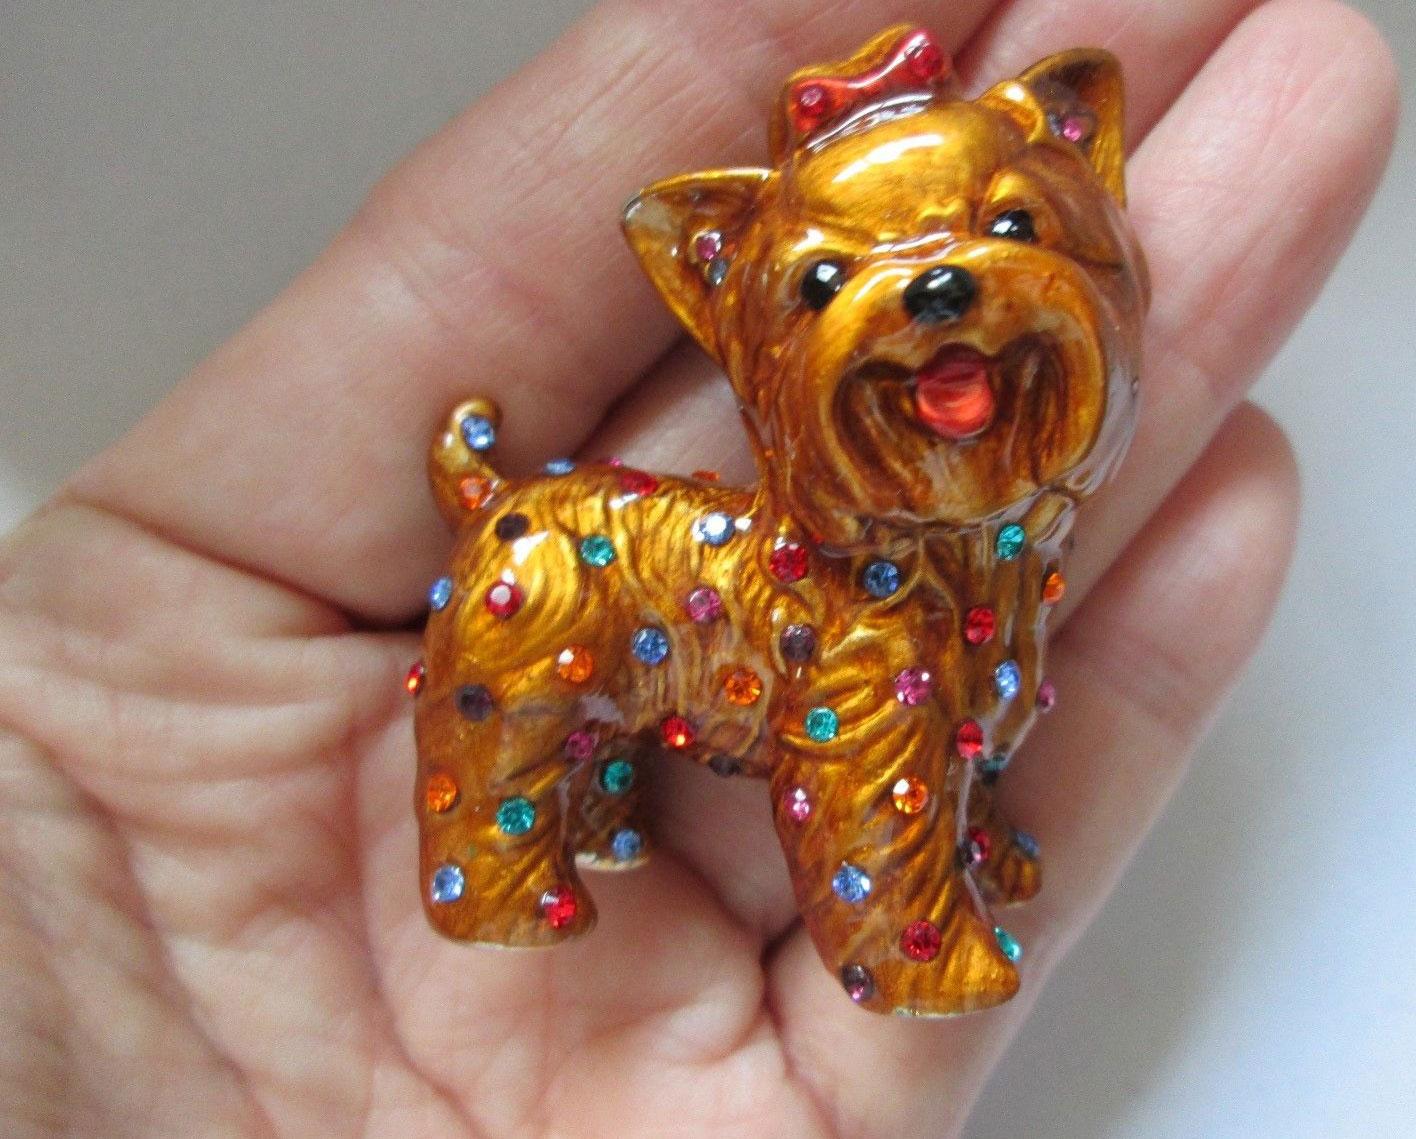 Adorable Terrier Dog Glossy brown Enamel encrusted with sparkling seed crystal glass in tones of turquoise, ruby, citrine & amethyst with a pink enamel tongue, jet nose and eyes dressed up in a pink bow. Roll over clasp; Signed to the reverse: